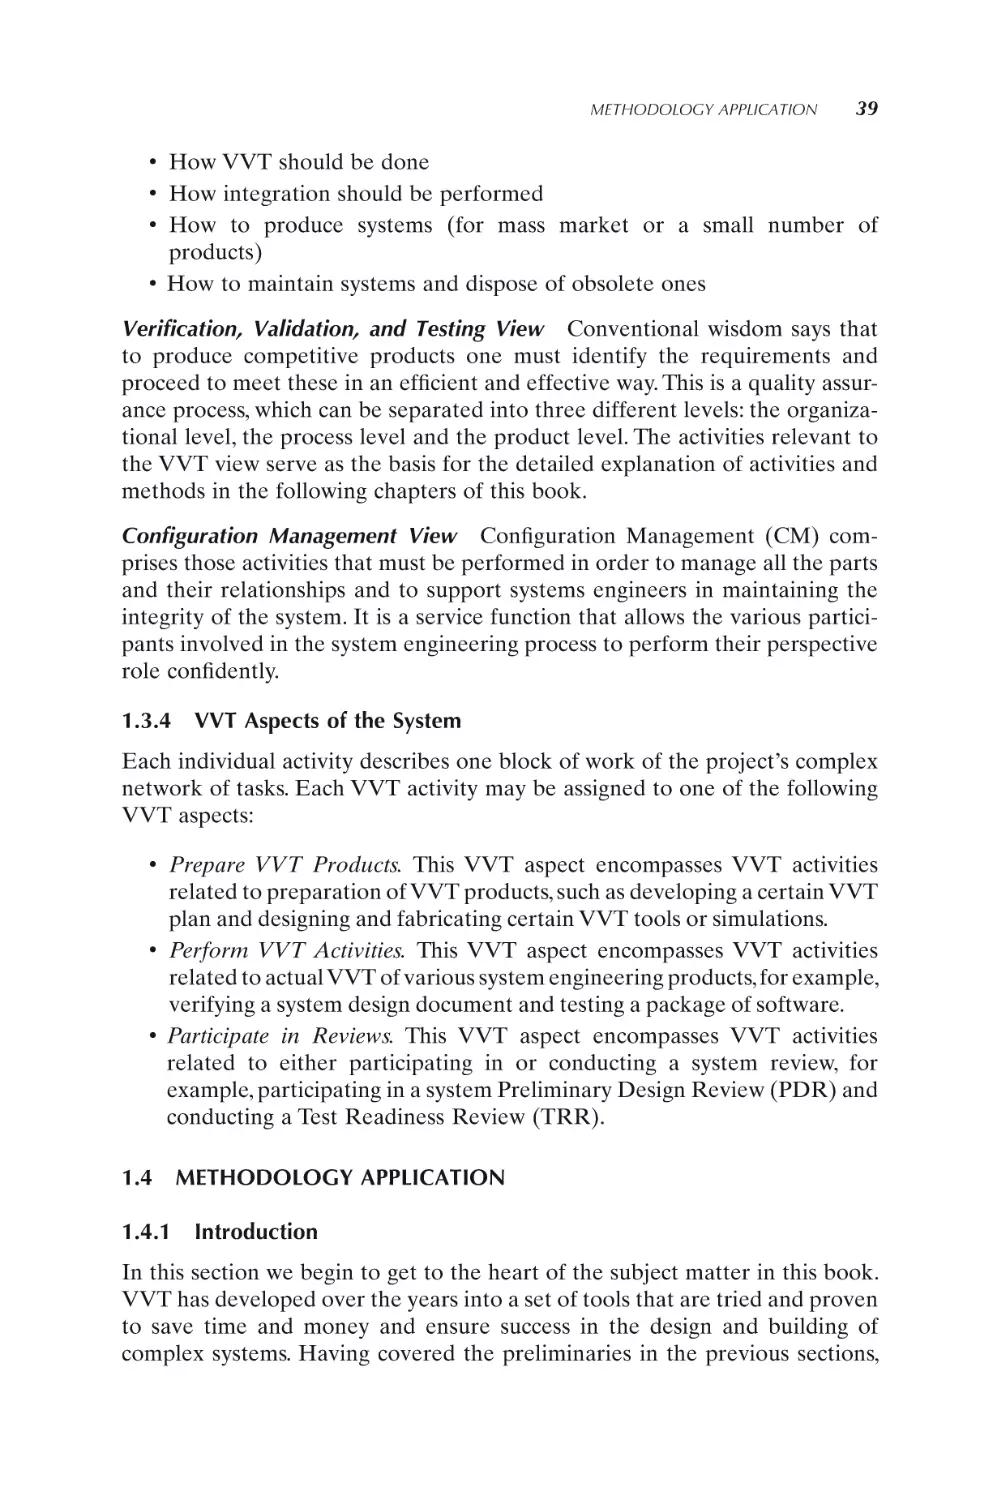 1.3.4 VVT Aspects of the System
1.4 METHODOLOGY APPLICATION
1.4.1 Introduction